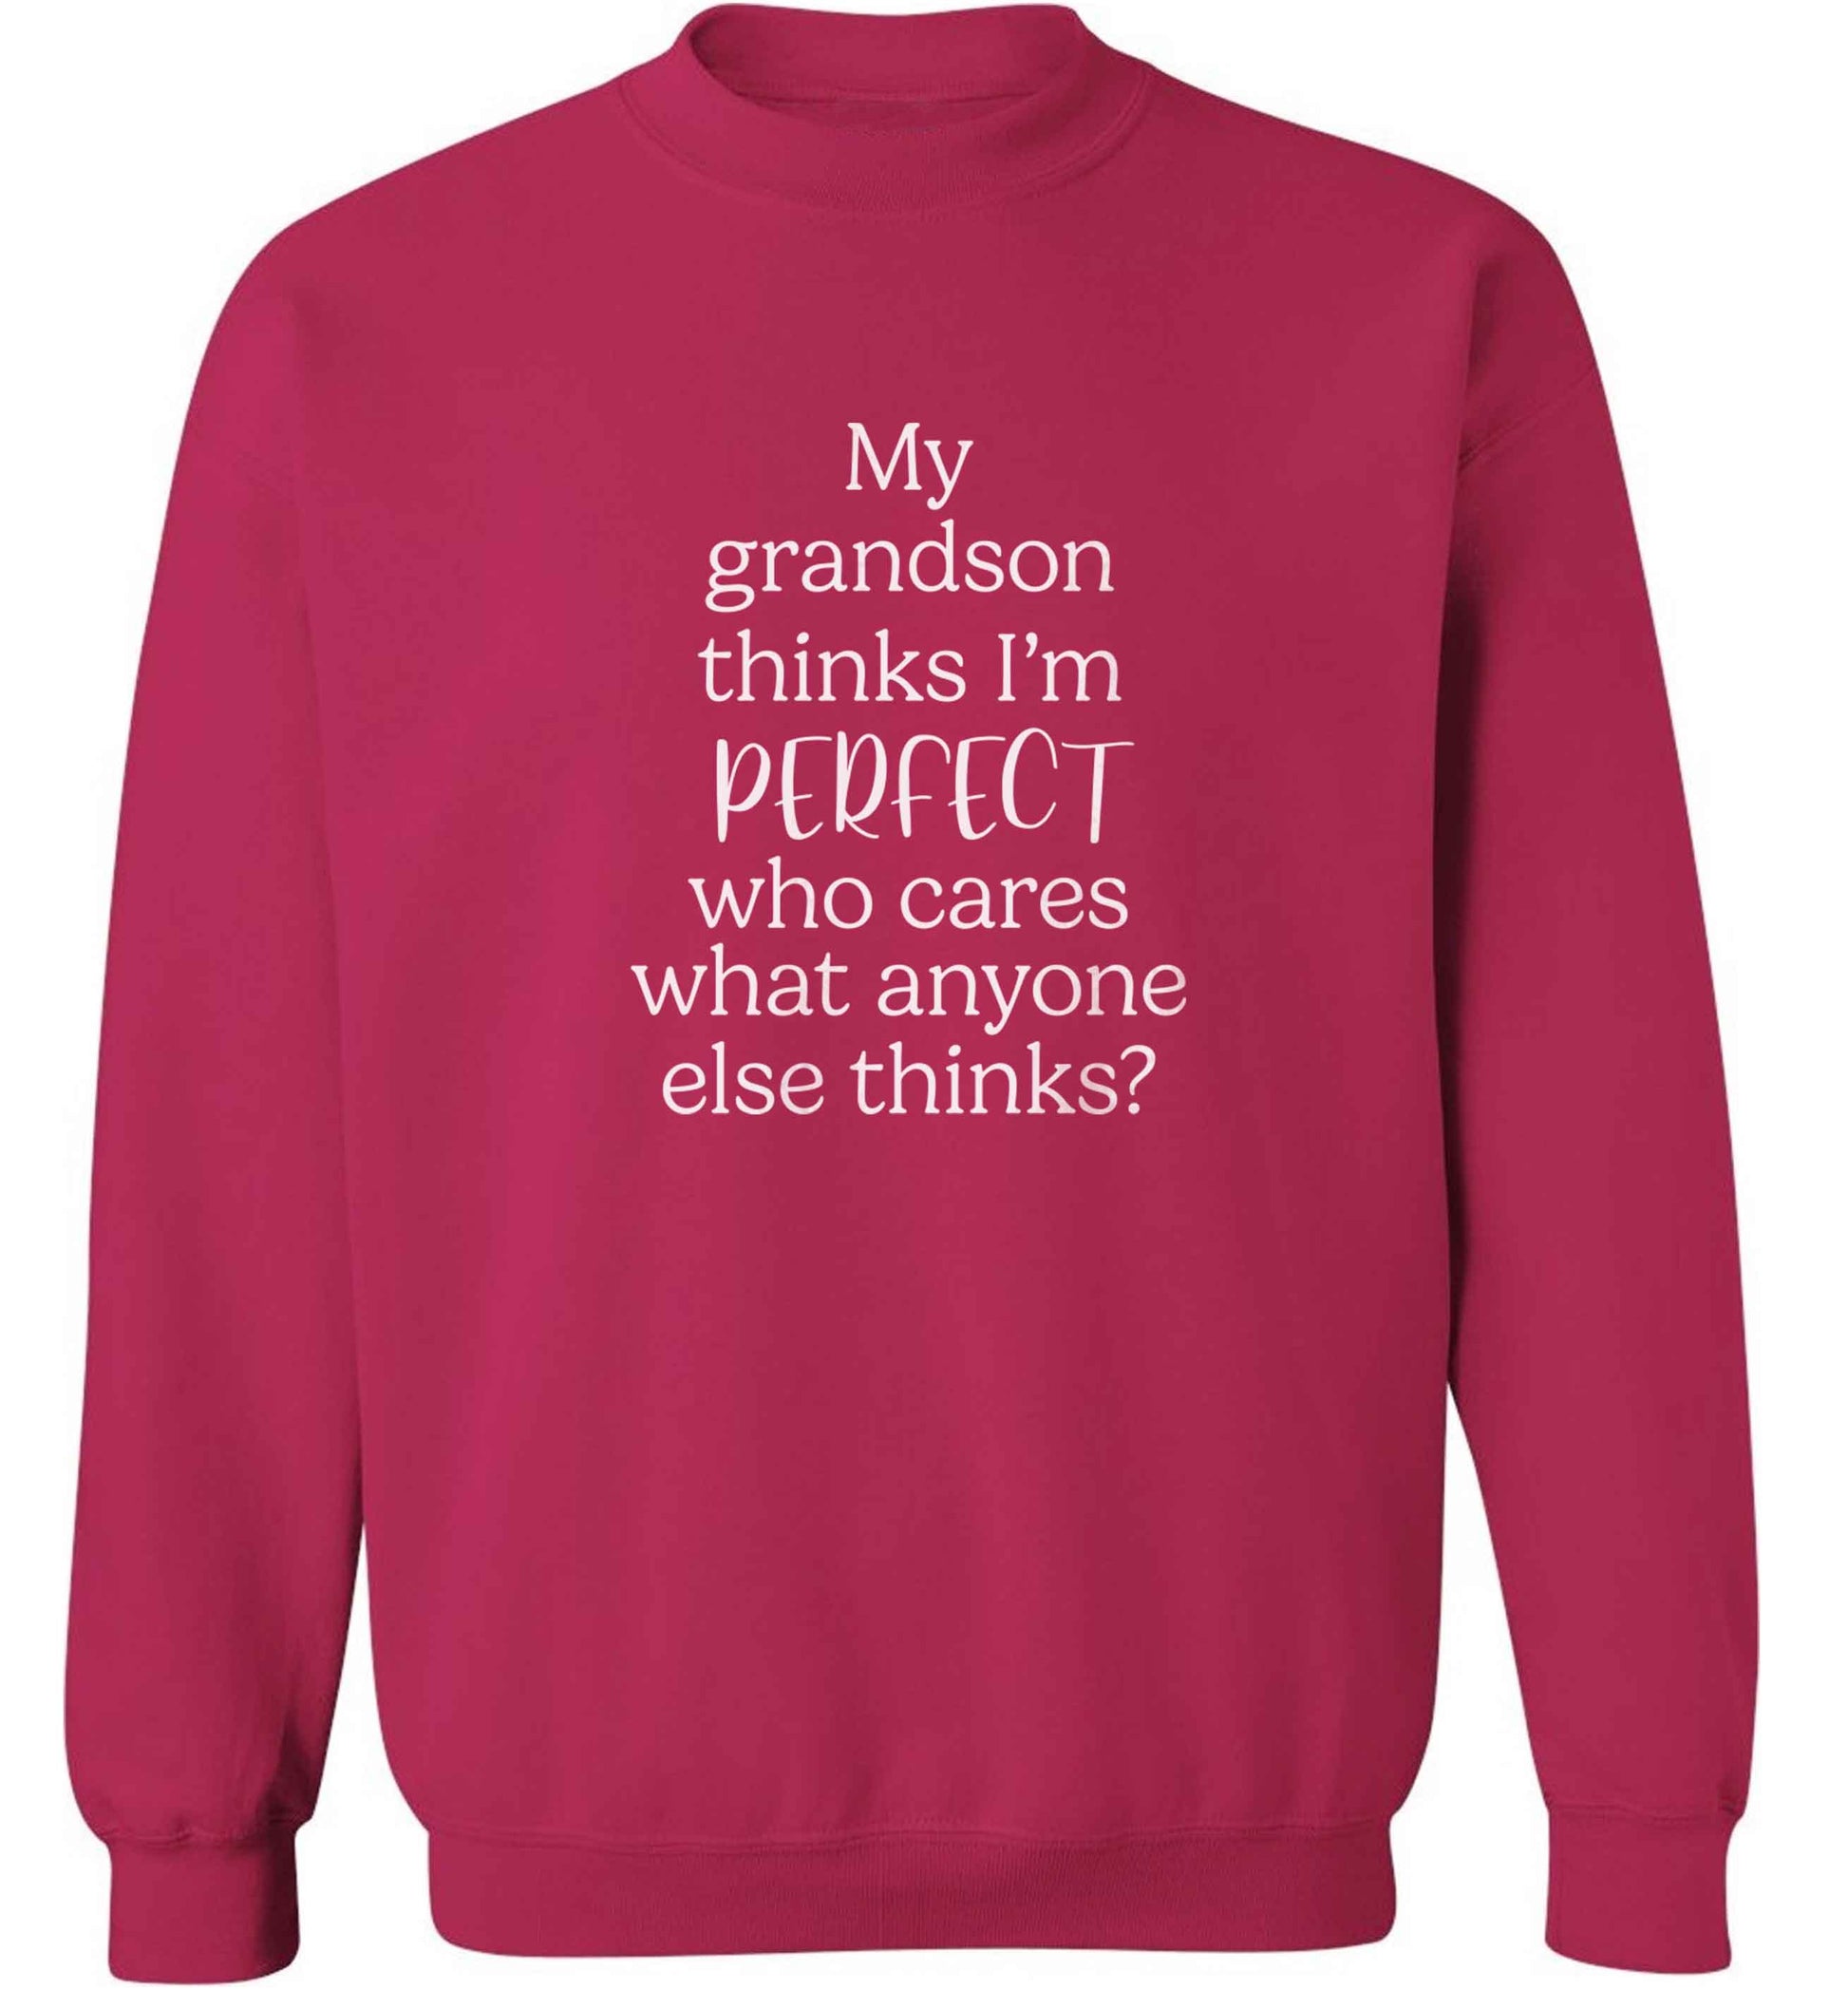 My Grandson thinks I'm perfect who cares what anyone else thinks? adult's unisex pink sweater 2XL